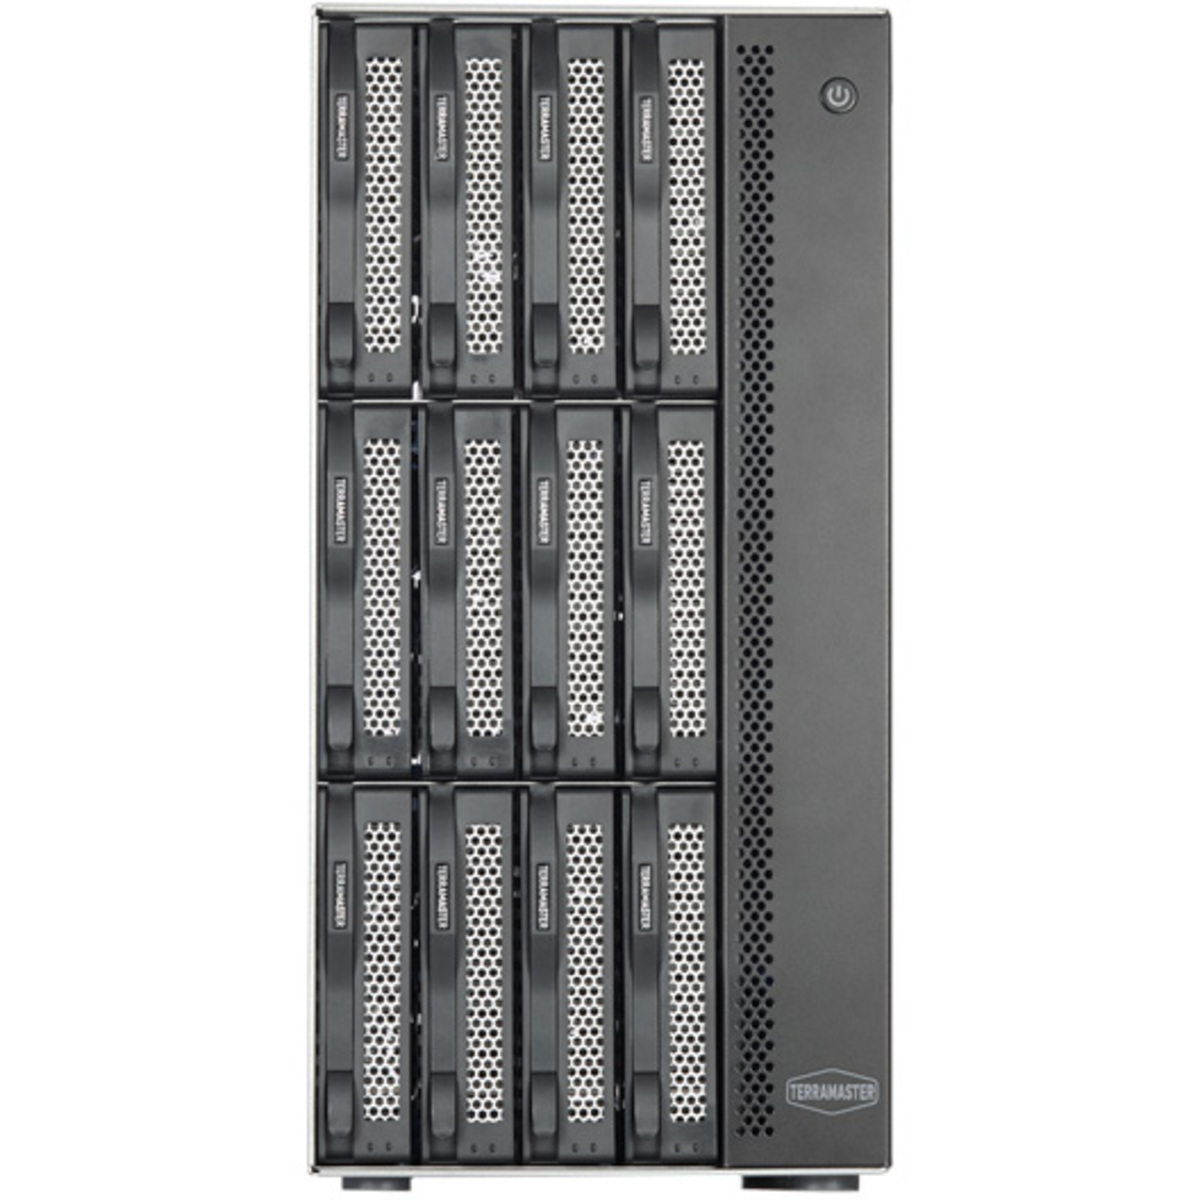 TerraMaster T12-423 14tb 12-Bay Desktop Multimedia / Power User / Business NAS - Network Attached Storage Device 7x2tb Samsung 870 EVO MZ-77E2T0BAM 2.5 560/530MB/s SATA 6Gb/s SSD CONSUMER Class Drives Installed - Burn-In Tested T12-423